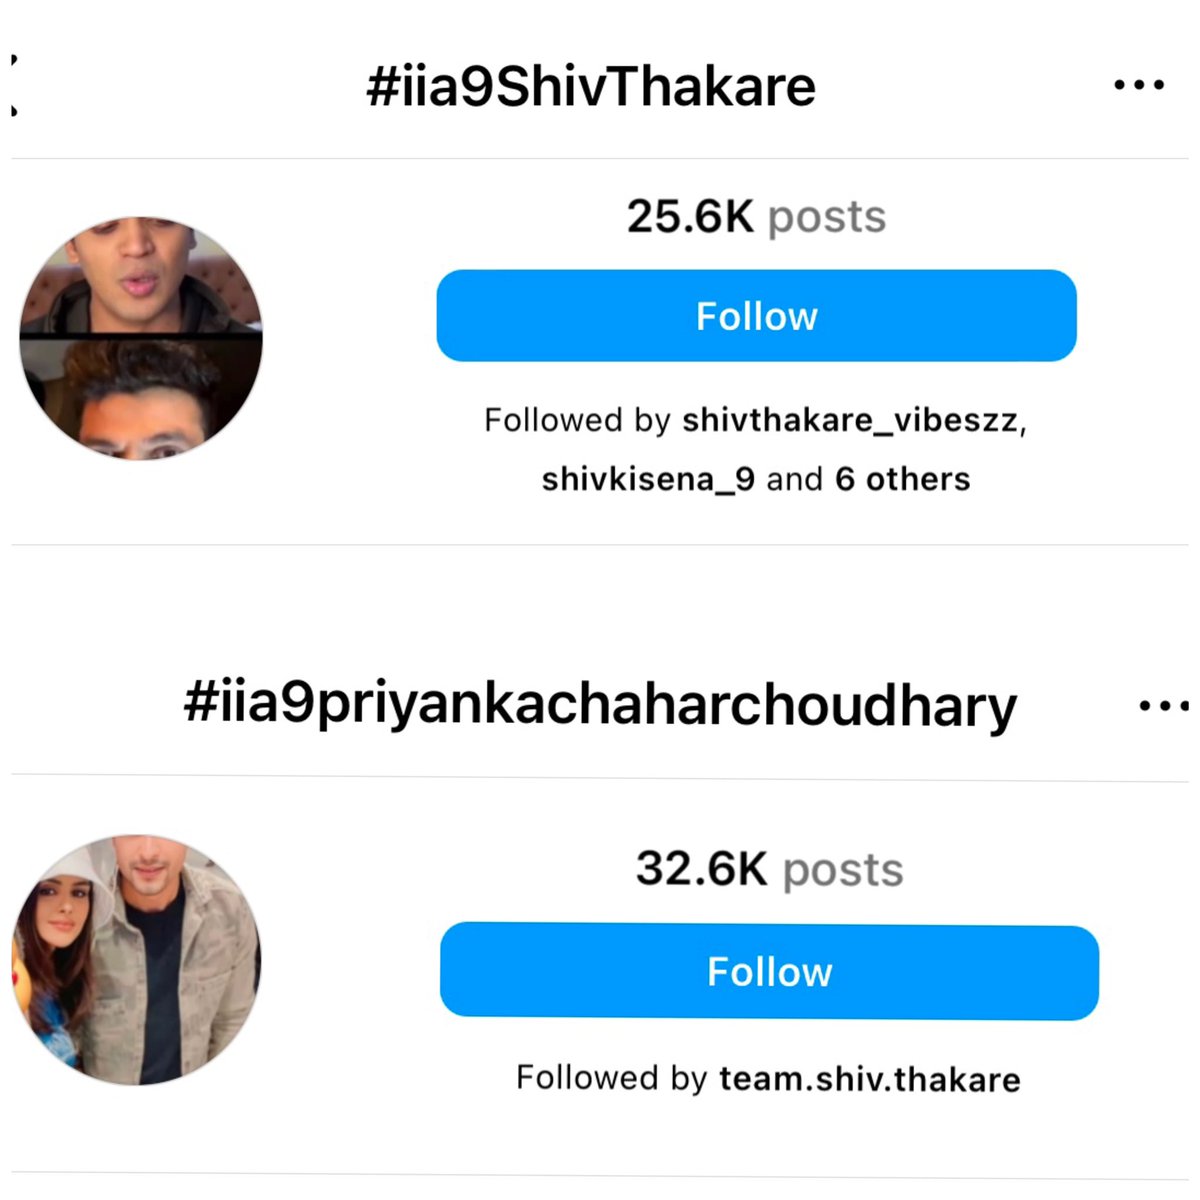 Guy's focus on this it's important..

Use more hashtag of #iia9ShivThakare in Insta

#ShivThakare 
@ShivThakare9 @ShivThakareFC @ShivThakareTM 
#shivkisena 
#ShivThakarefans